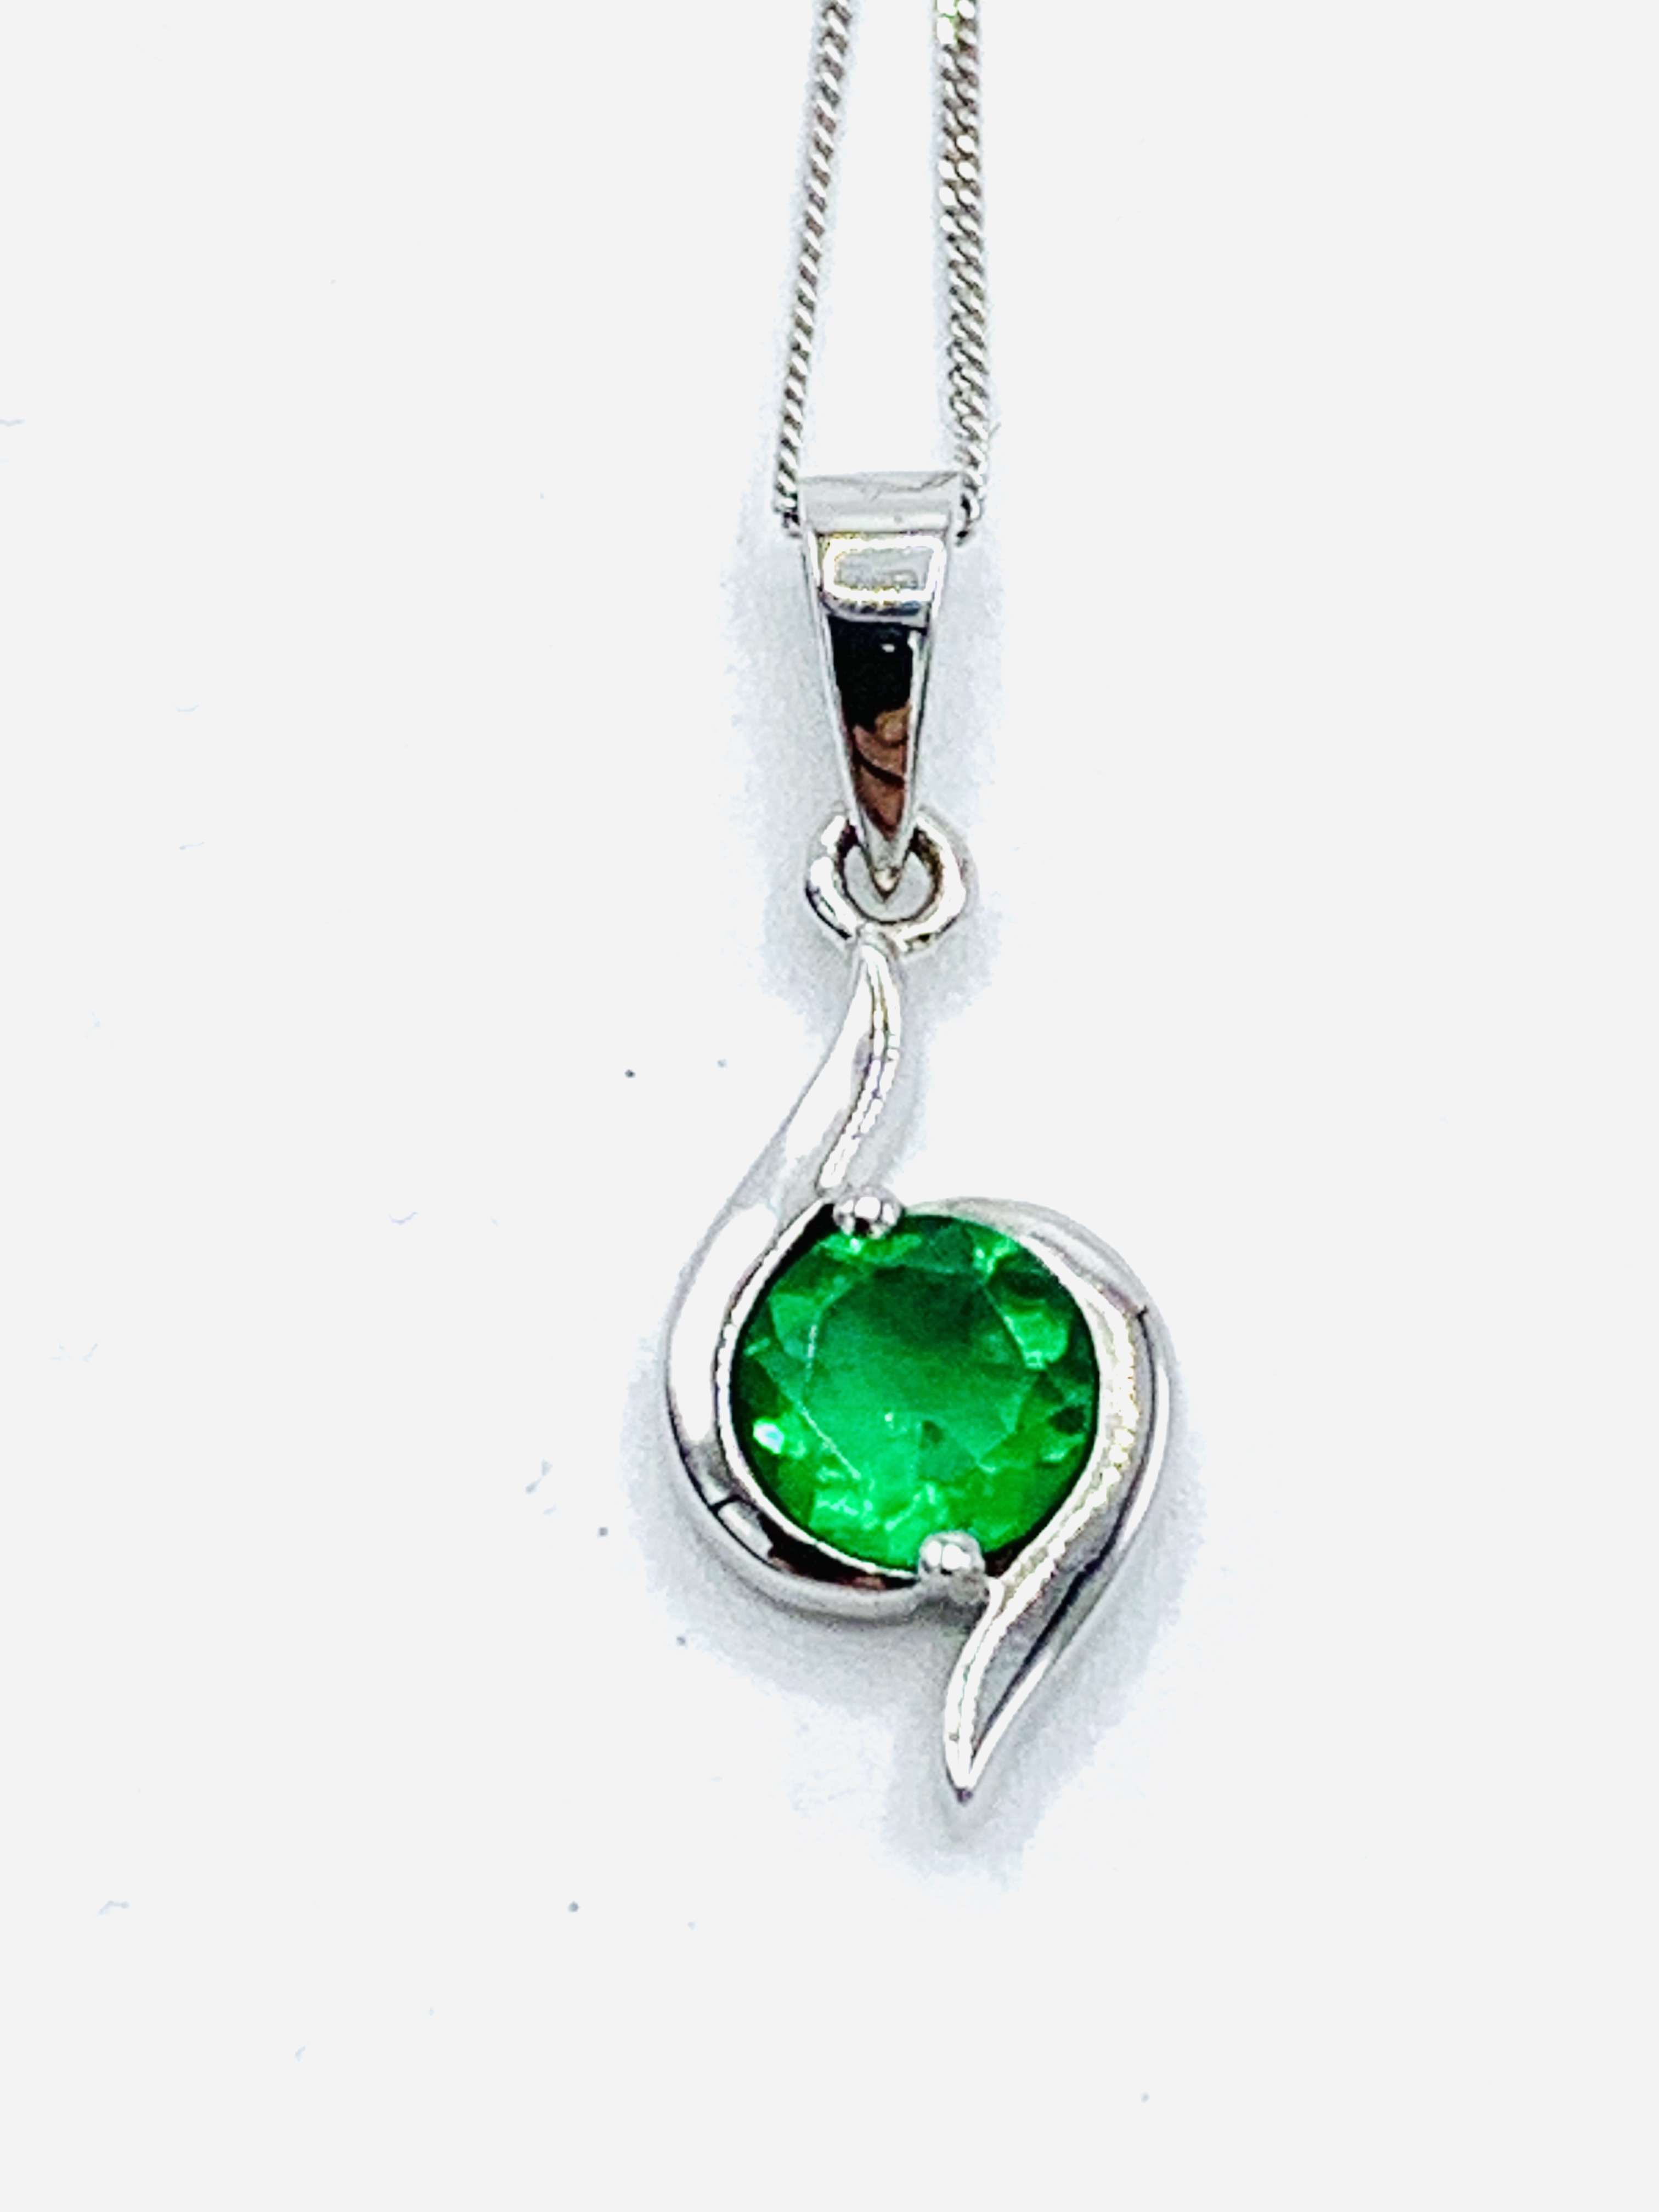 9ct white gold and green stone pendant on a 9ct white gold chain